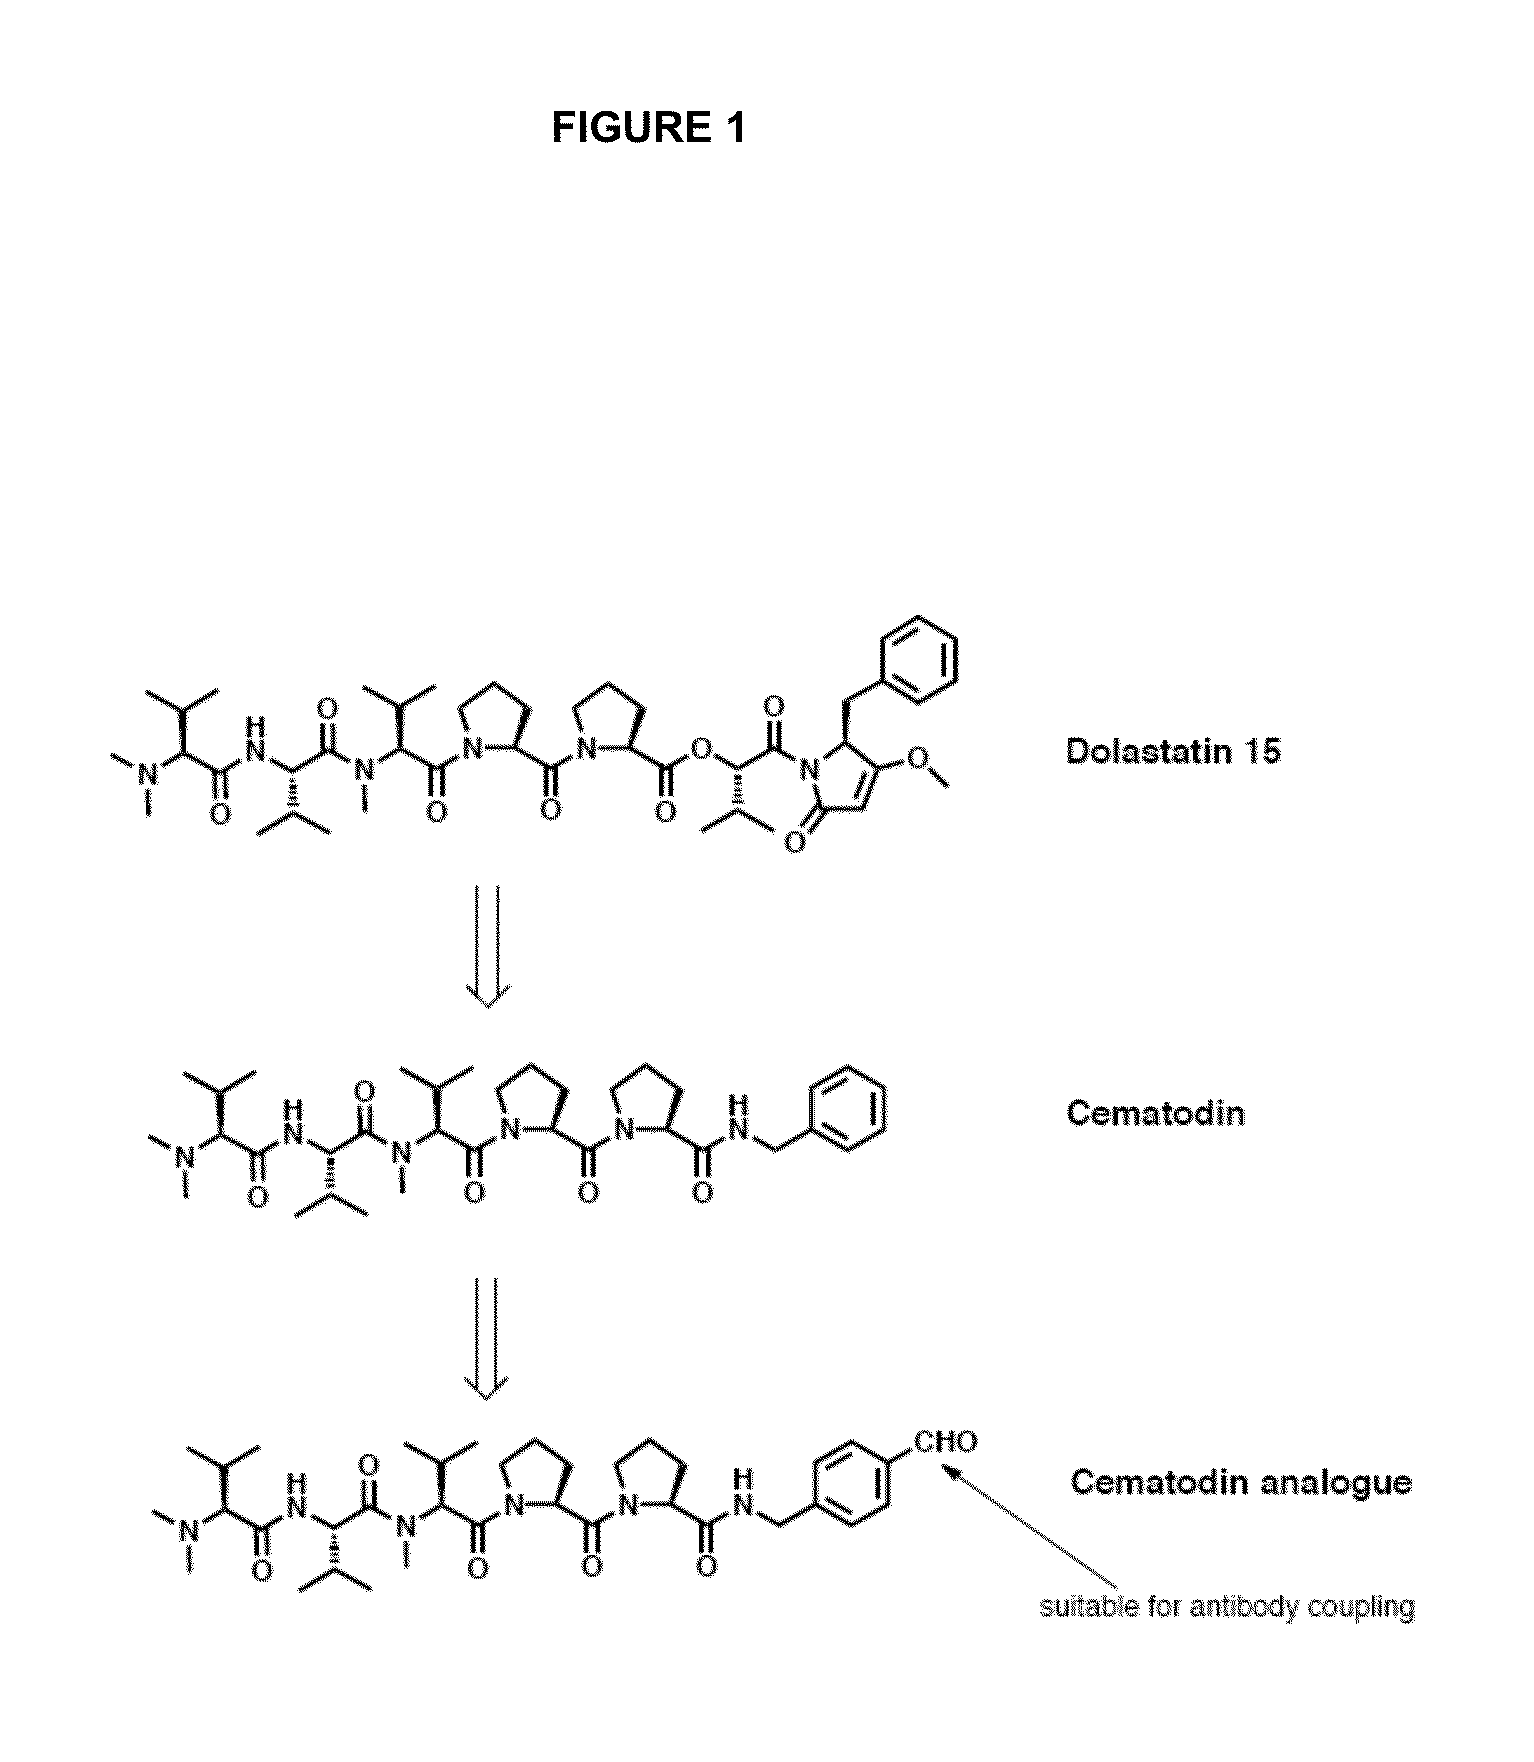 Thiazolidine linker for the conjugation of drugs to antibodies